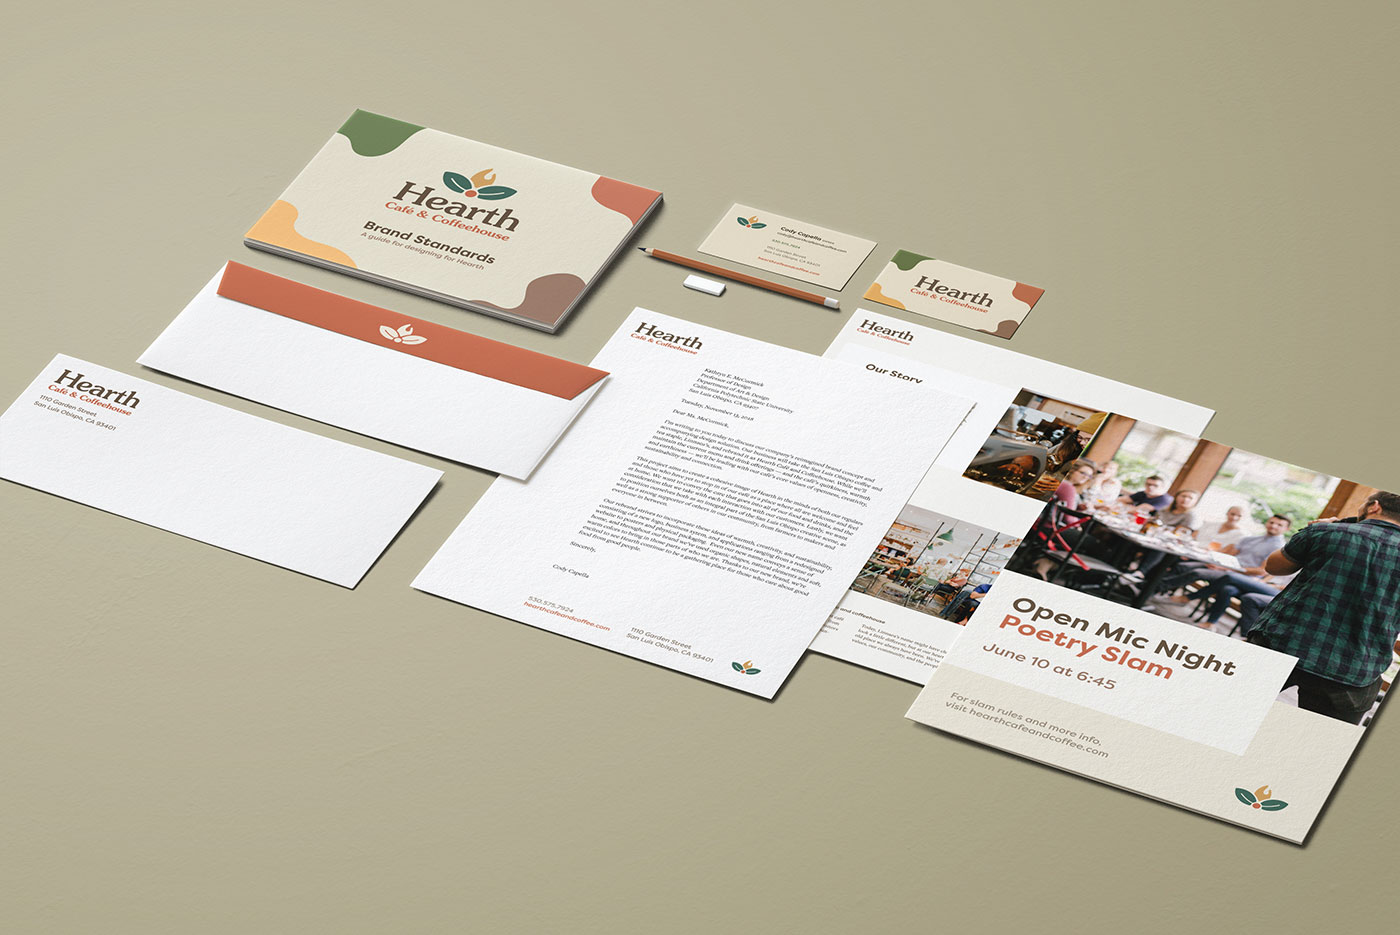 Hearth's identity system, including business cards, envelope, letterhead, and brand standards manual